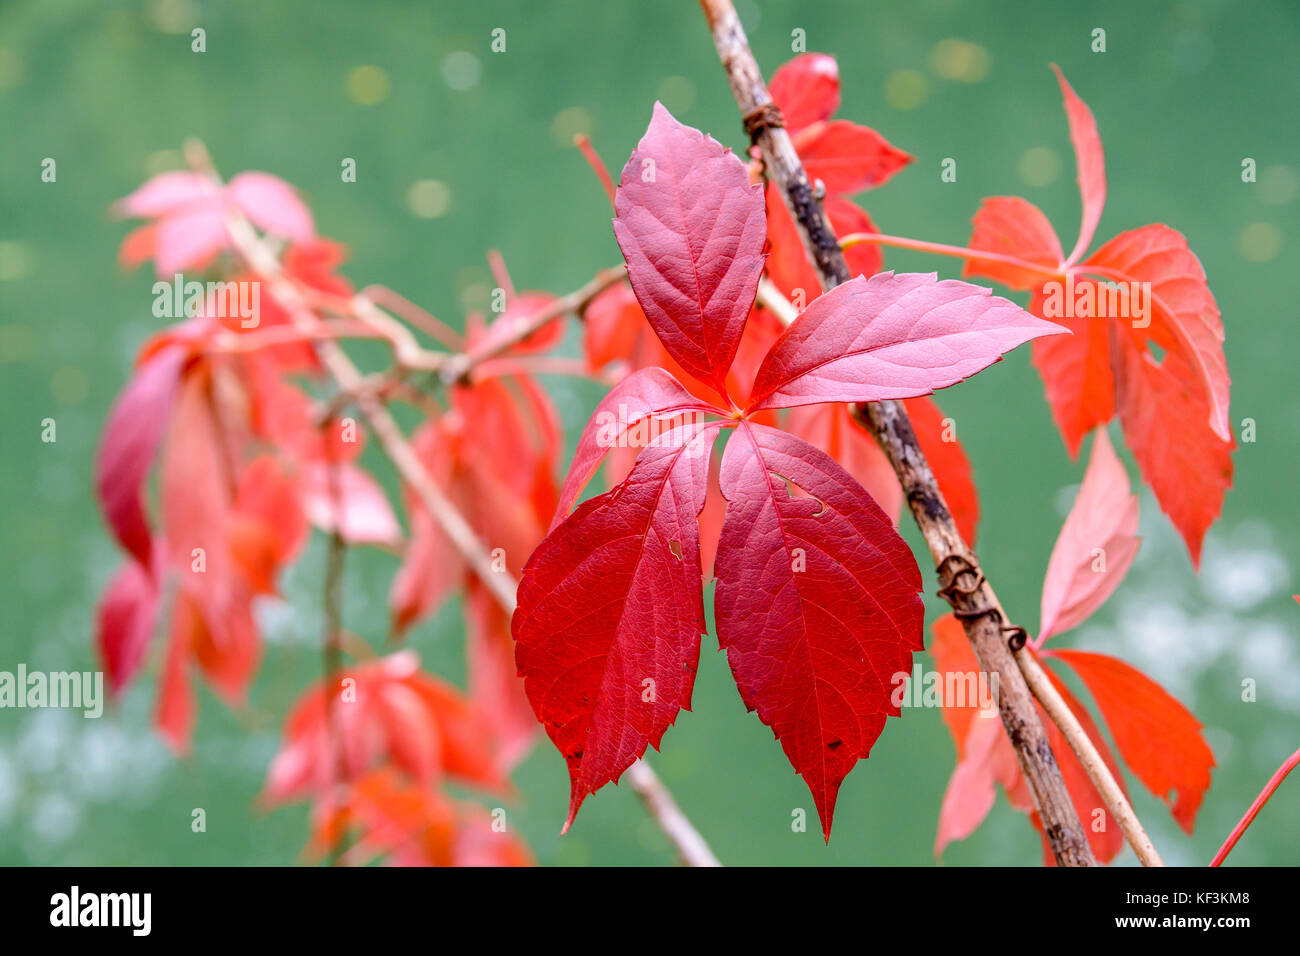 Close-up view of the bright red leaf of a Virginia creeper plant at fall, with its five leaflets, against a green background. Stock Photo